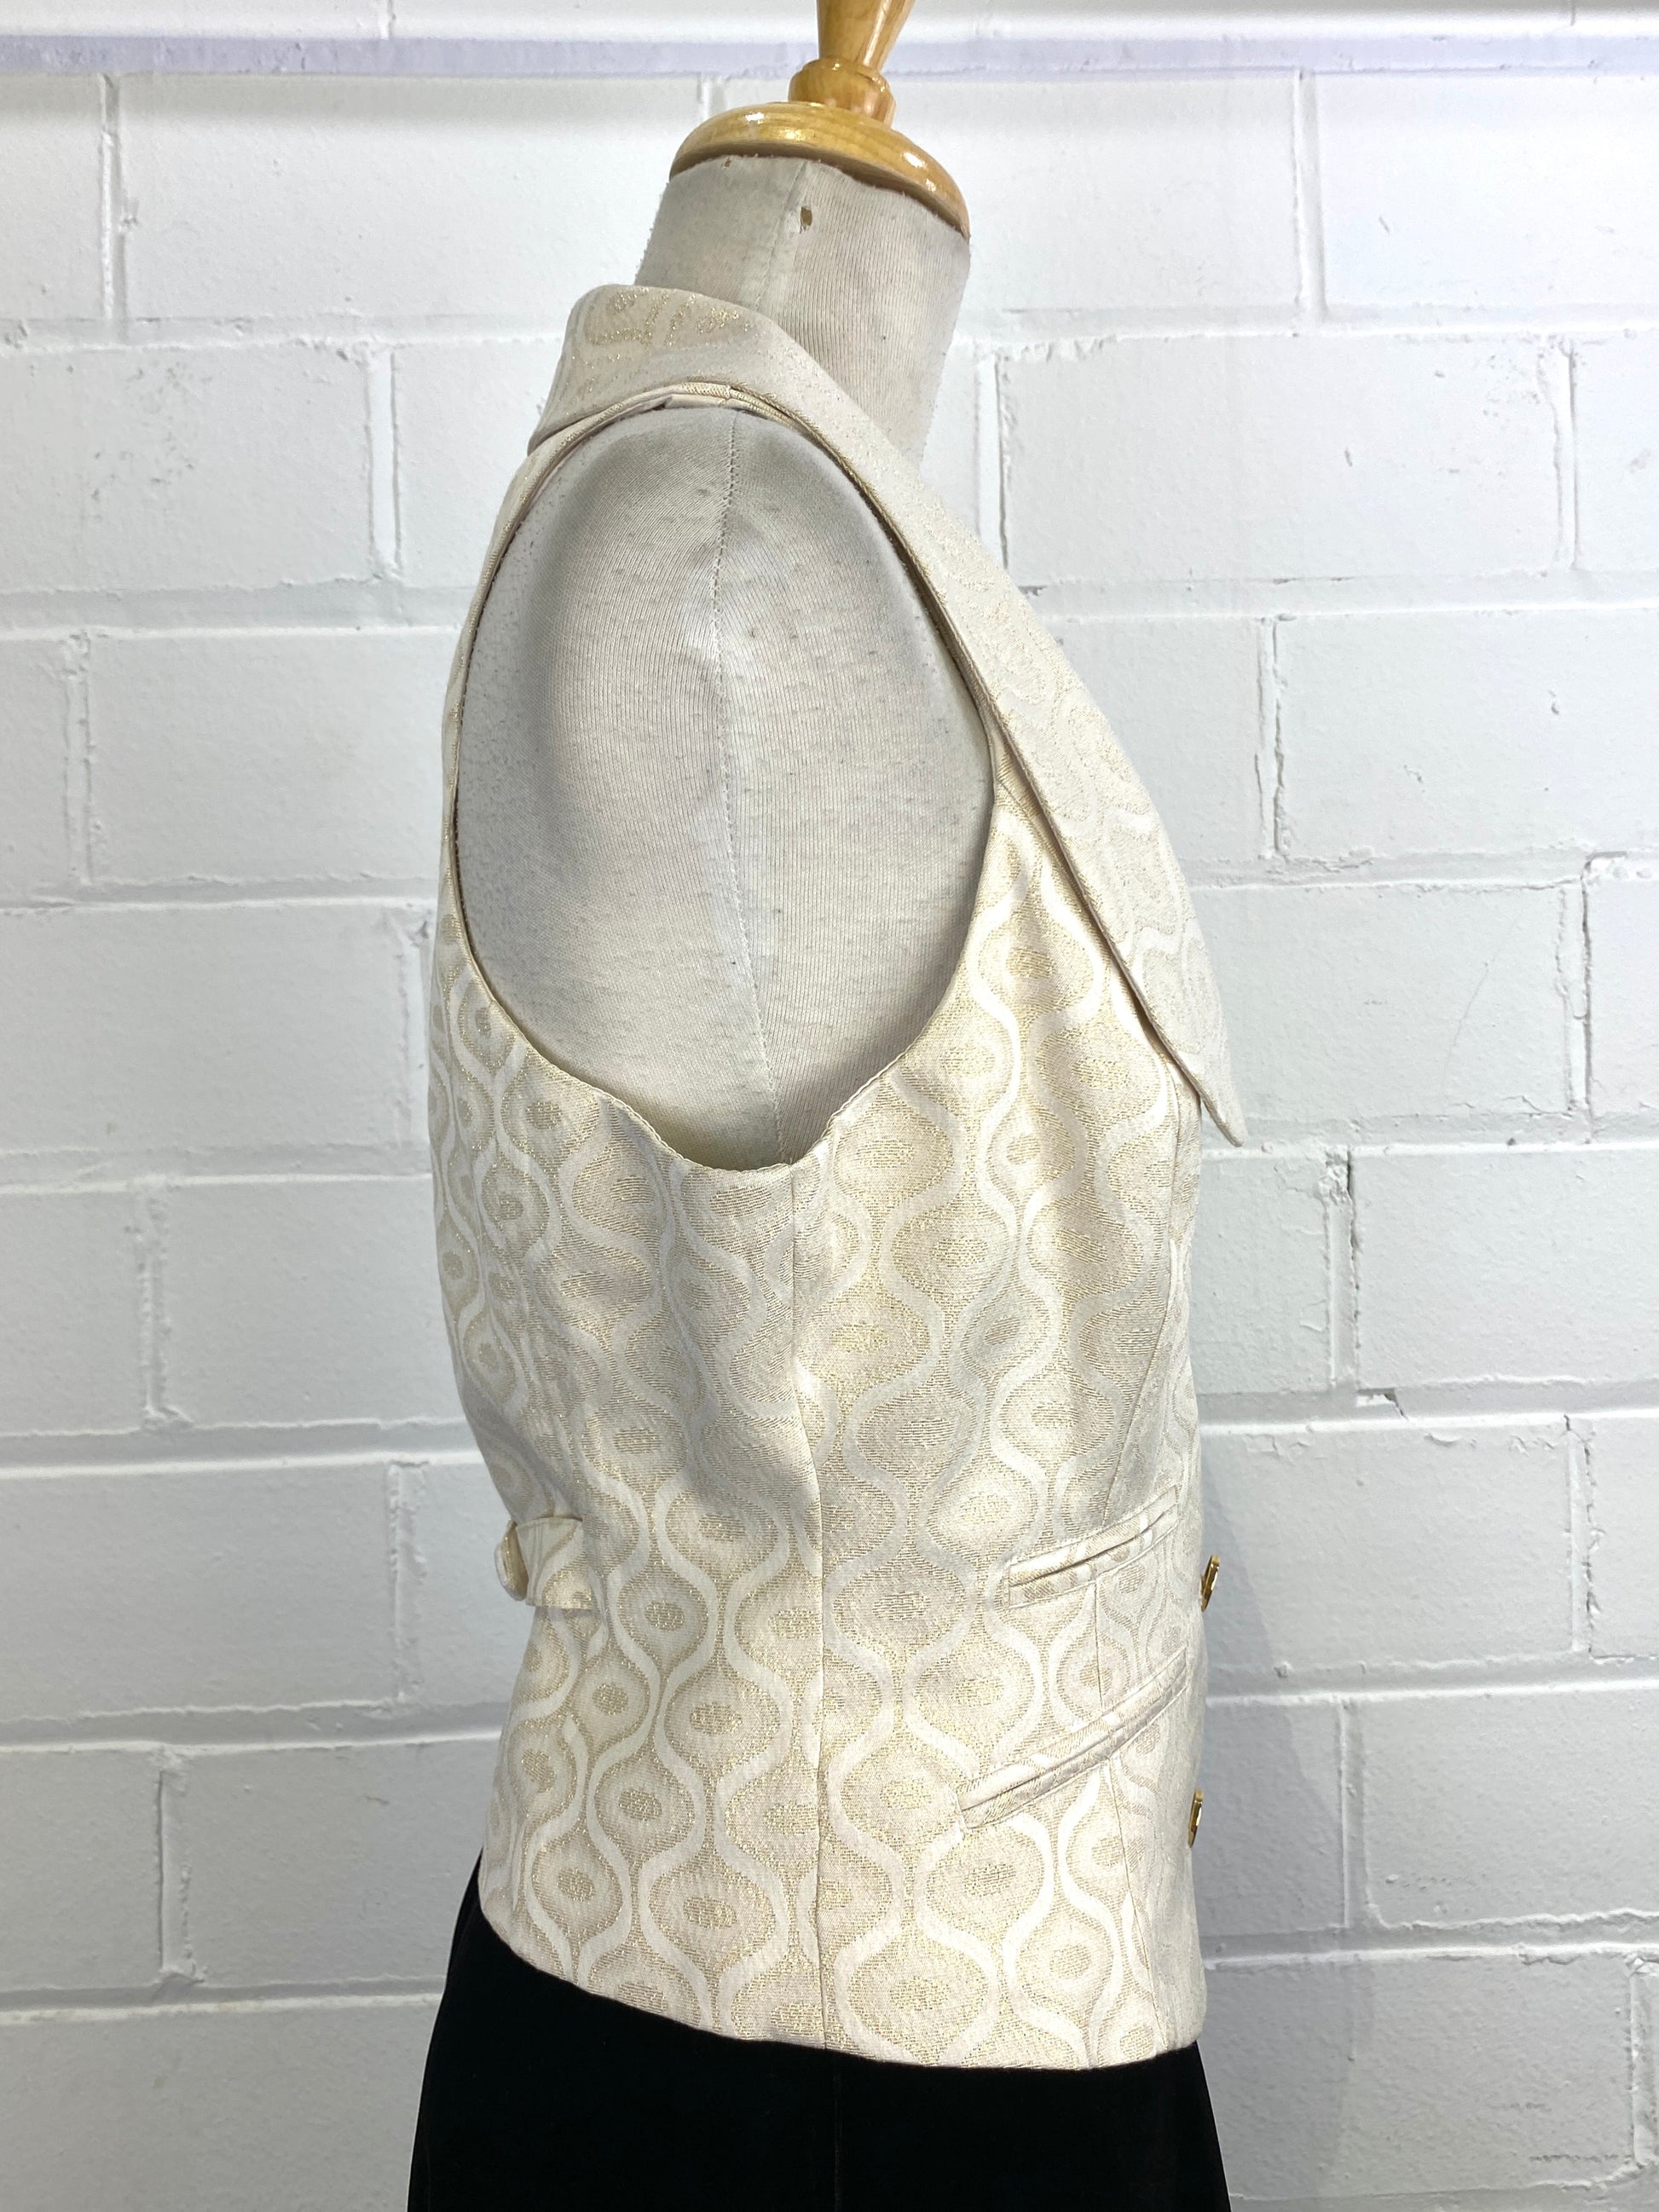 Vintage Y2K Cream & Gold Metallic Vest/ Waistcoat with Ogee Pattern, New With Tags, Med